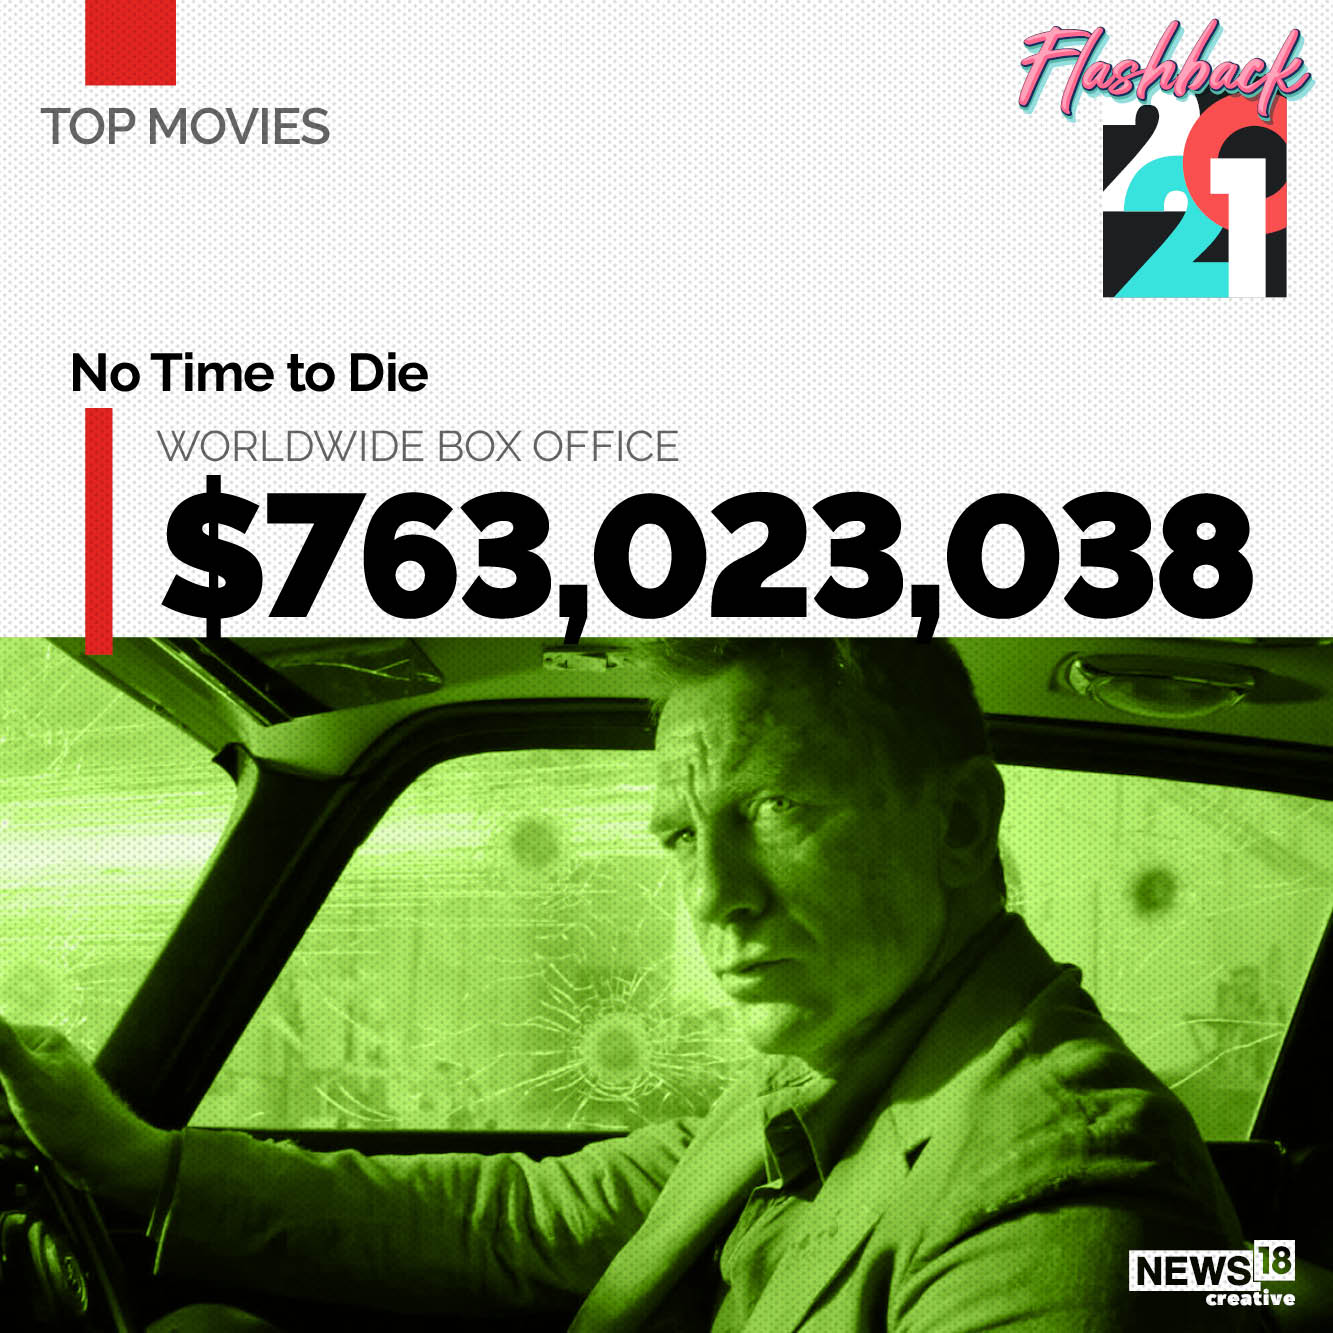 2021 highest grossing movies